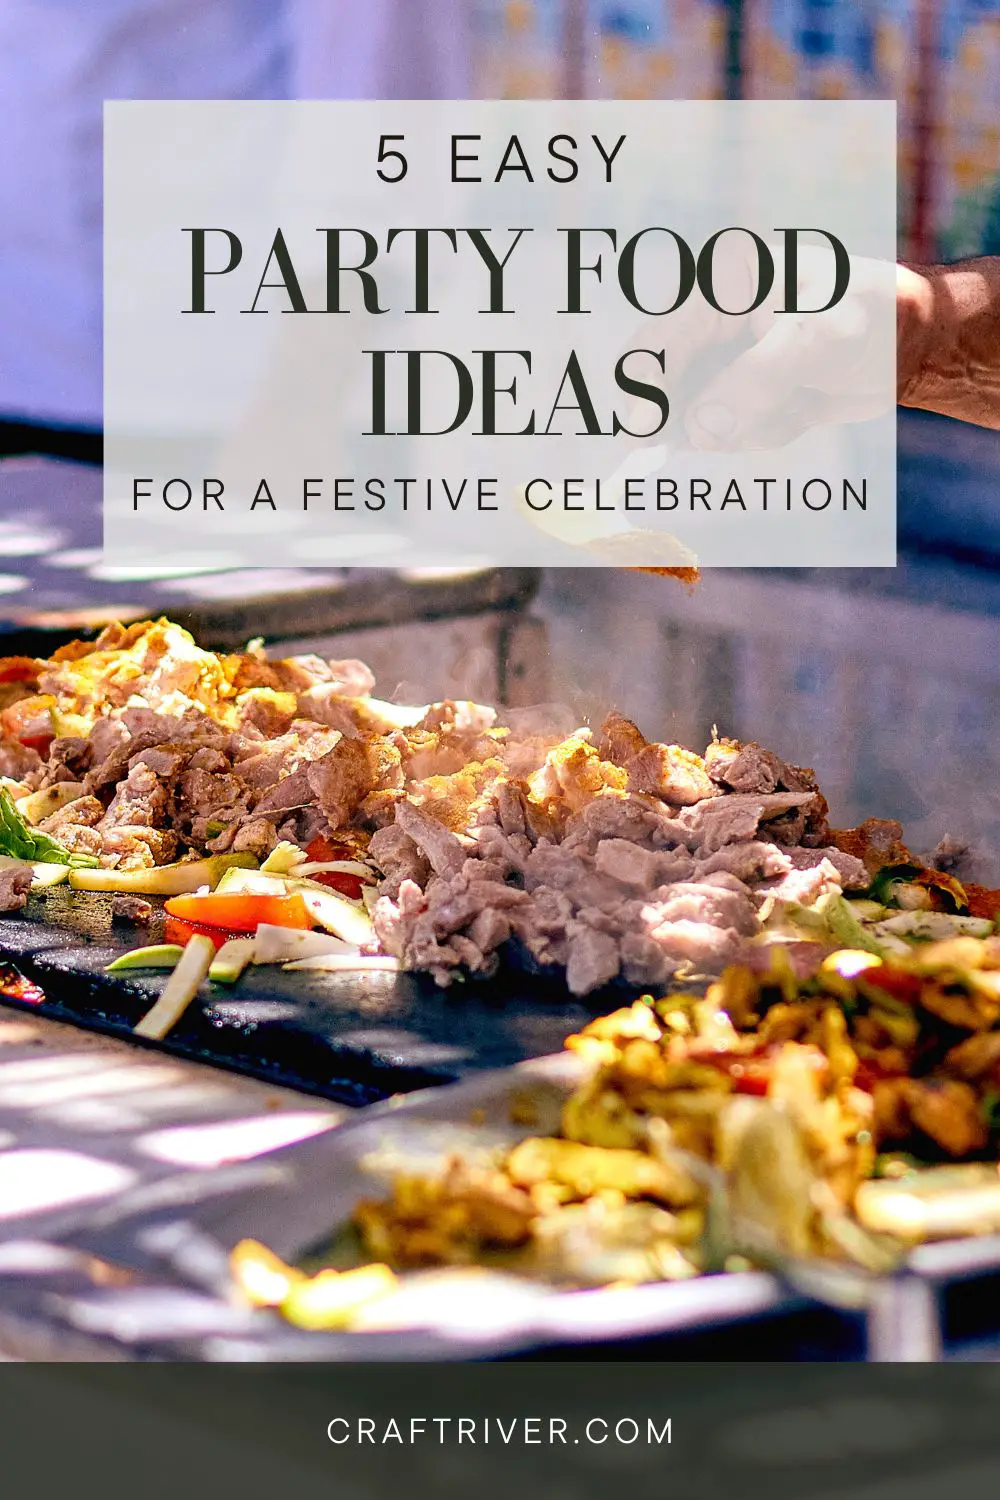 Easy Party Food Ideas for a Festive Celebration (1)